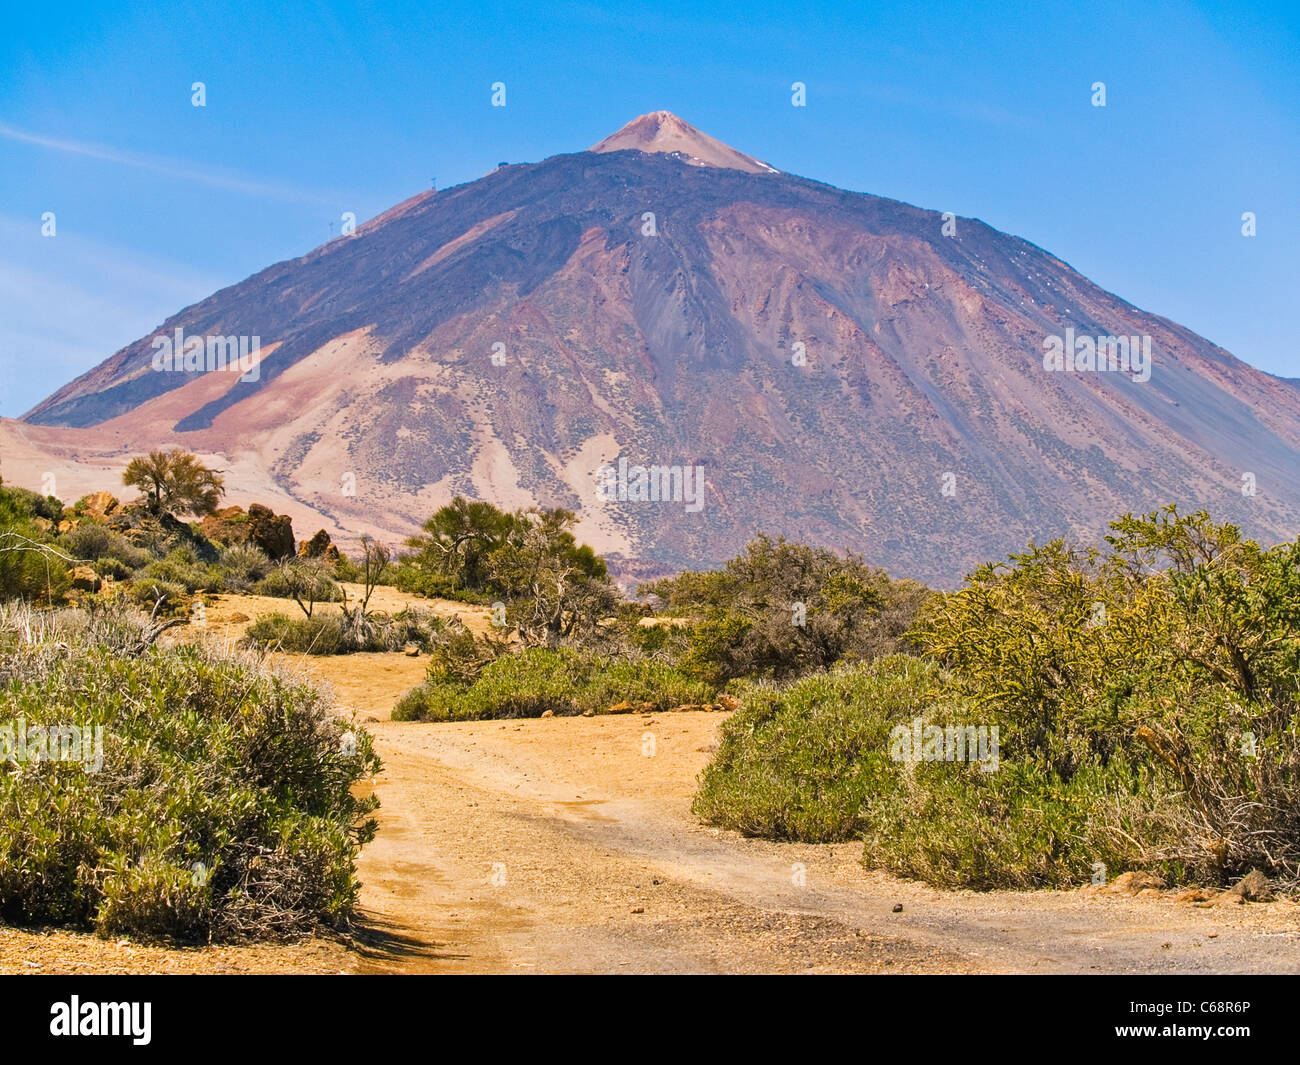 Mount Teide in the national park Tenerife, Canary Islands Spain Europe Stock Photo